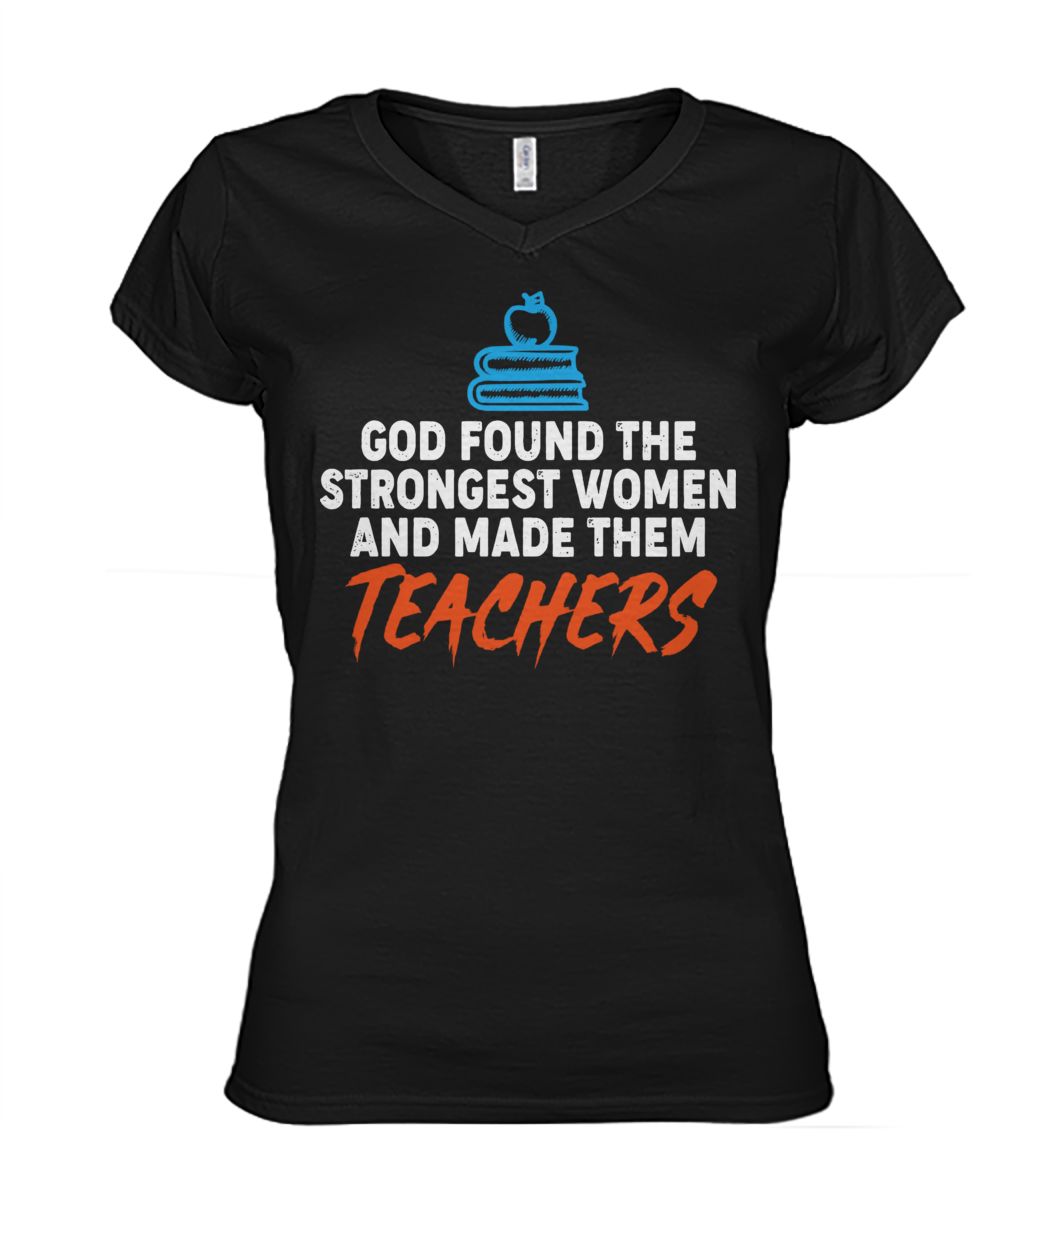 God found the strongest women and made them teachers women's v-neck